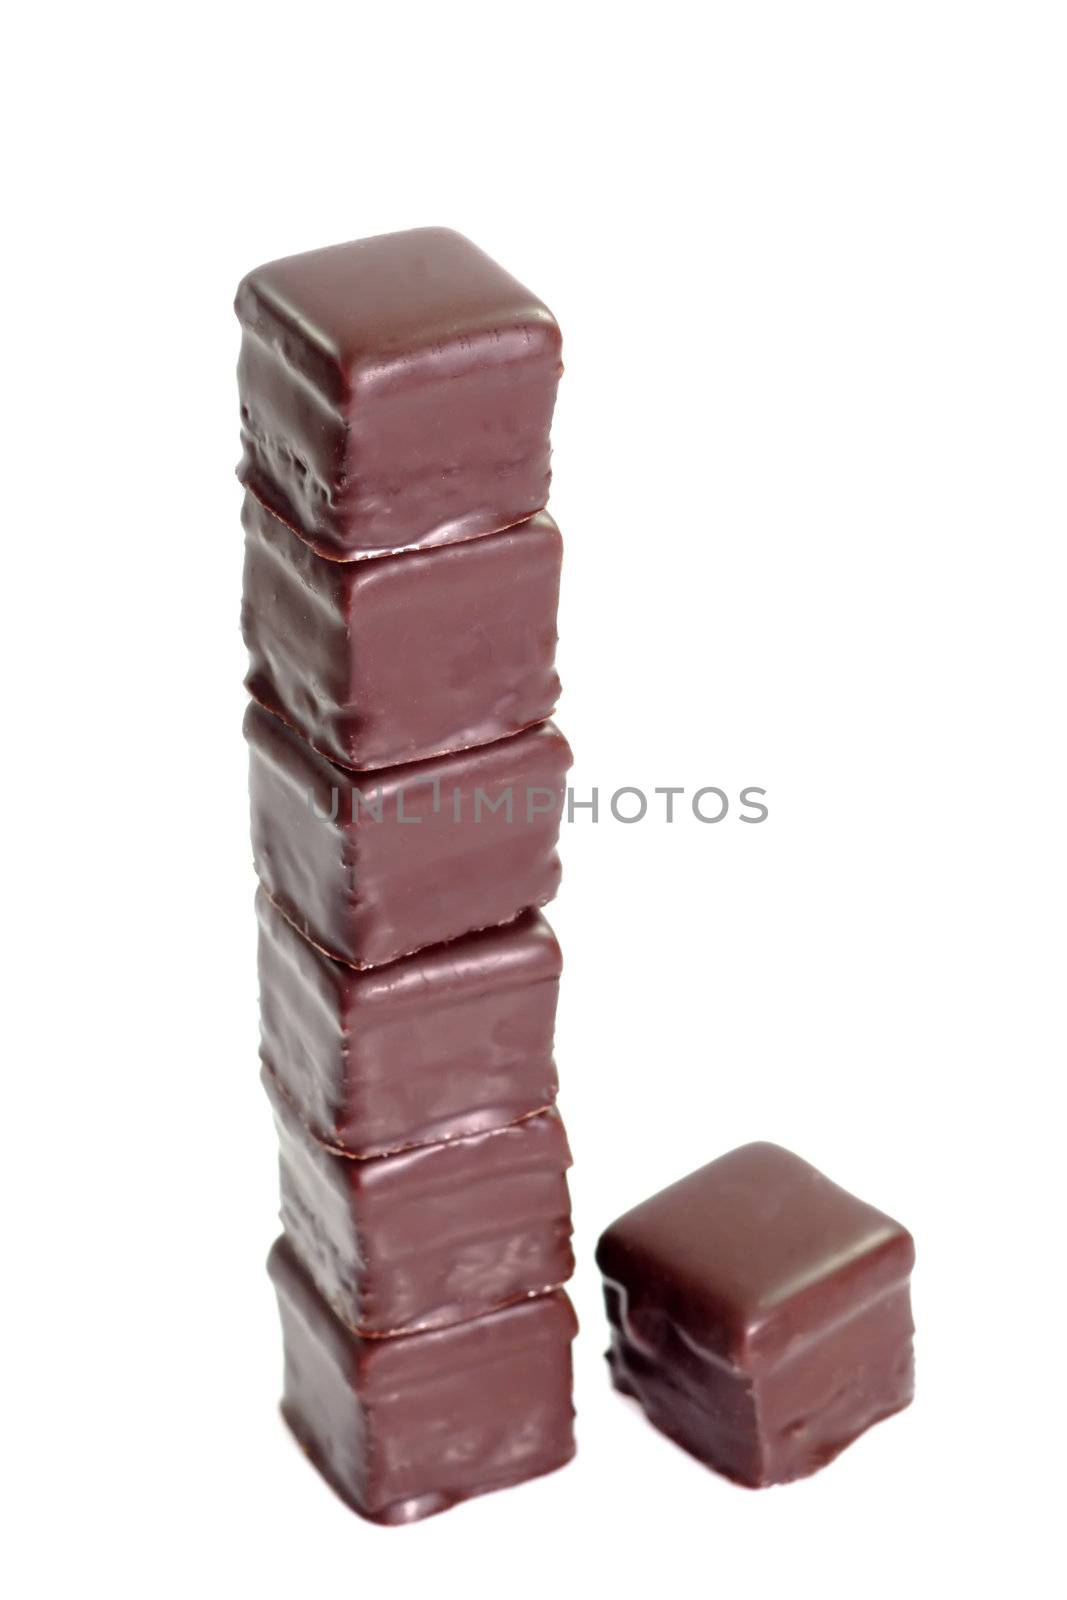 Tower of sweet chocolate confection on bright background